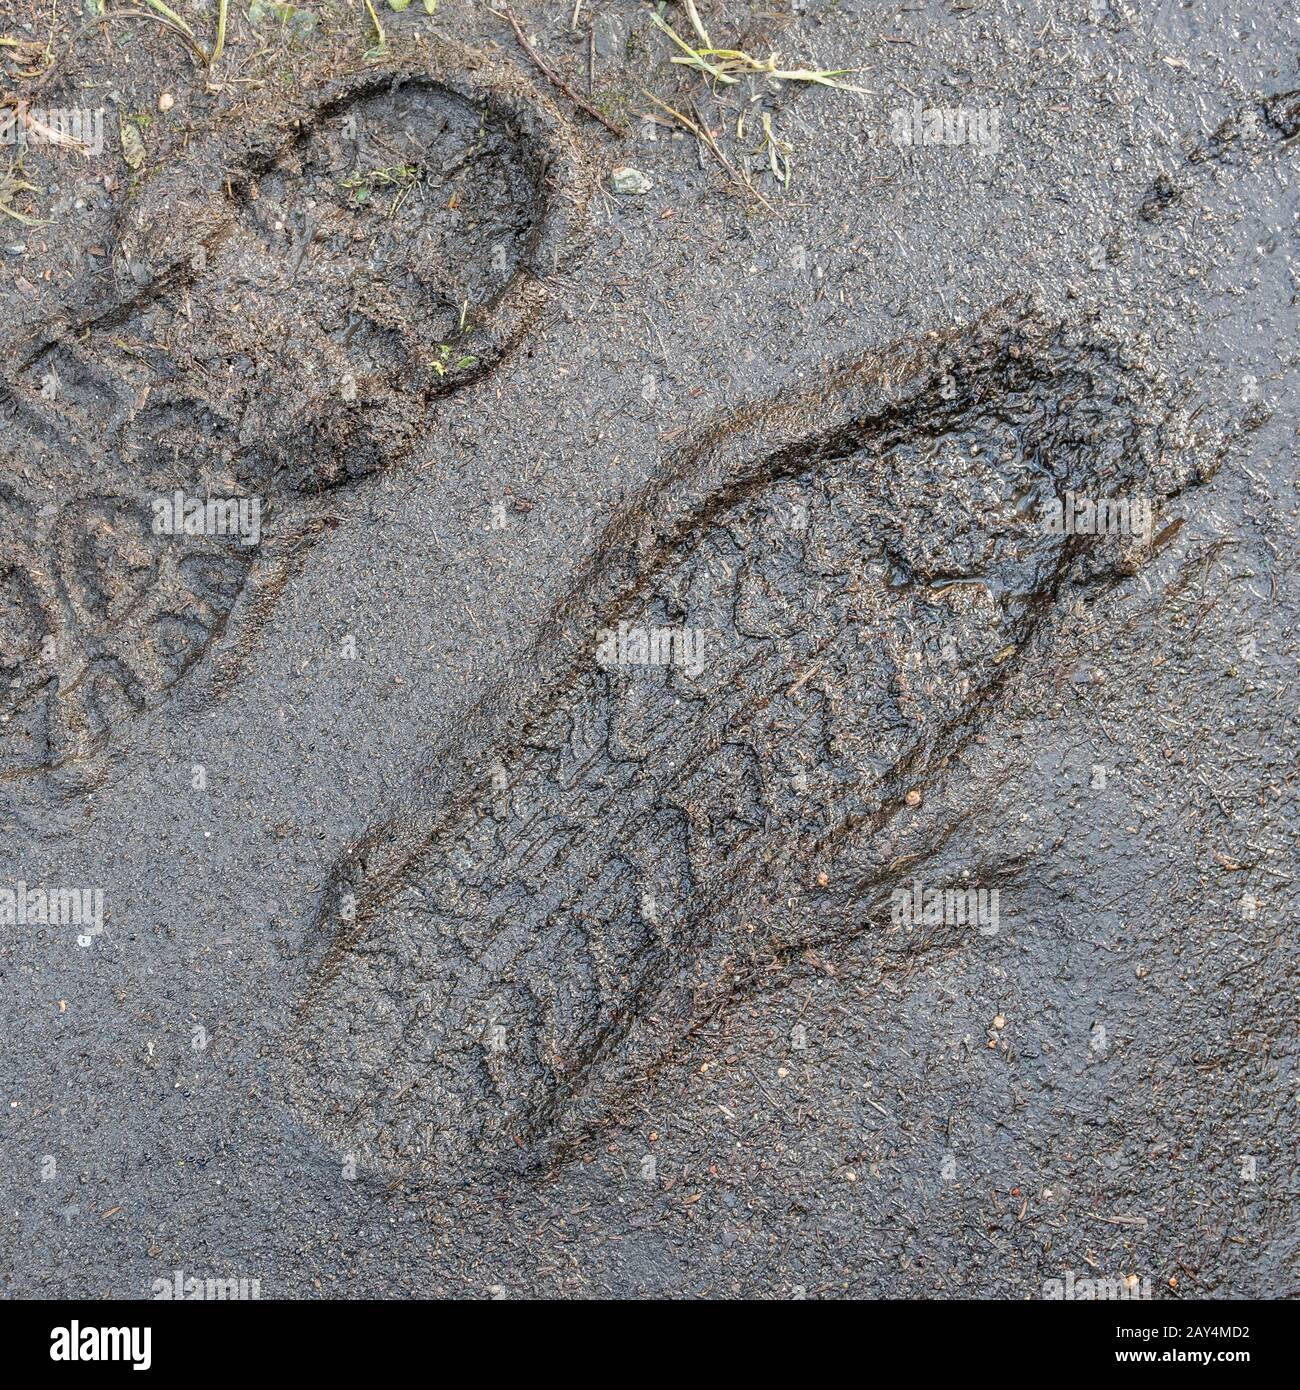 Two boot prints / shoe prints / footprints on muddy rural country footpath. Metaphor for bad weather or winter time, autumn season, 'stick in the mud' Stock Photo